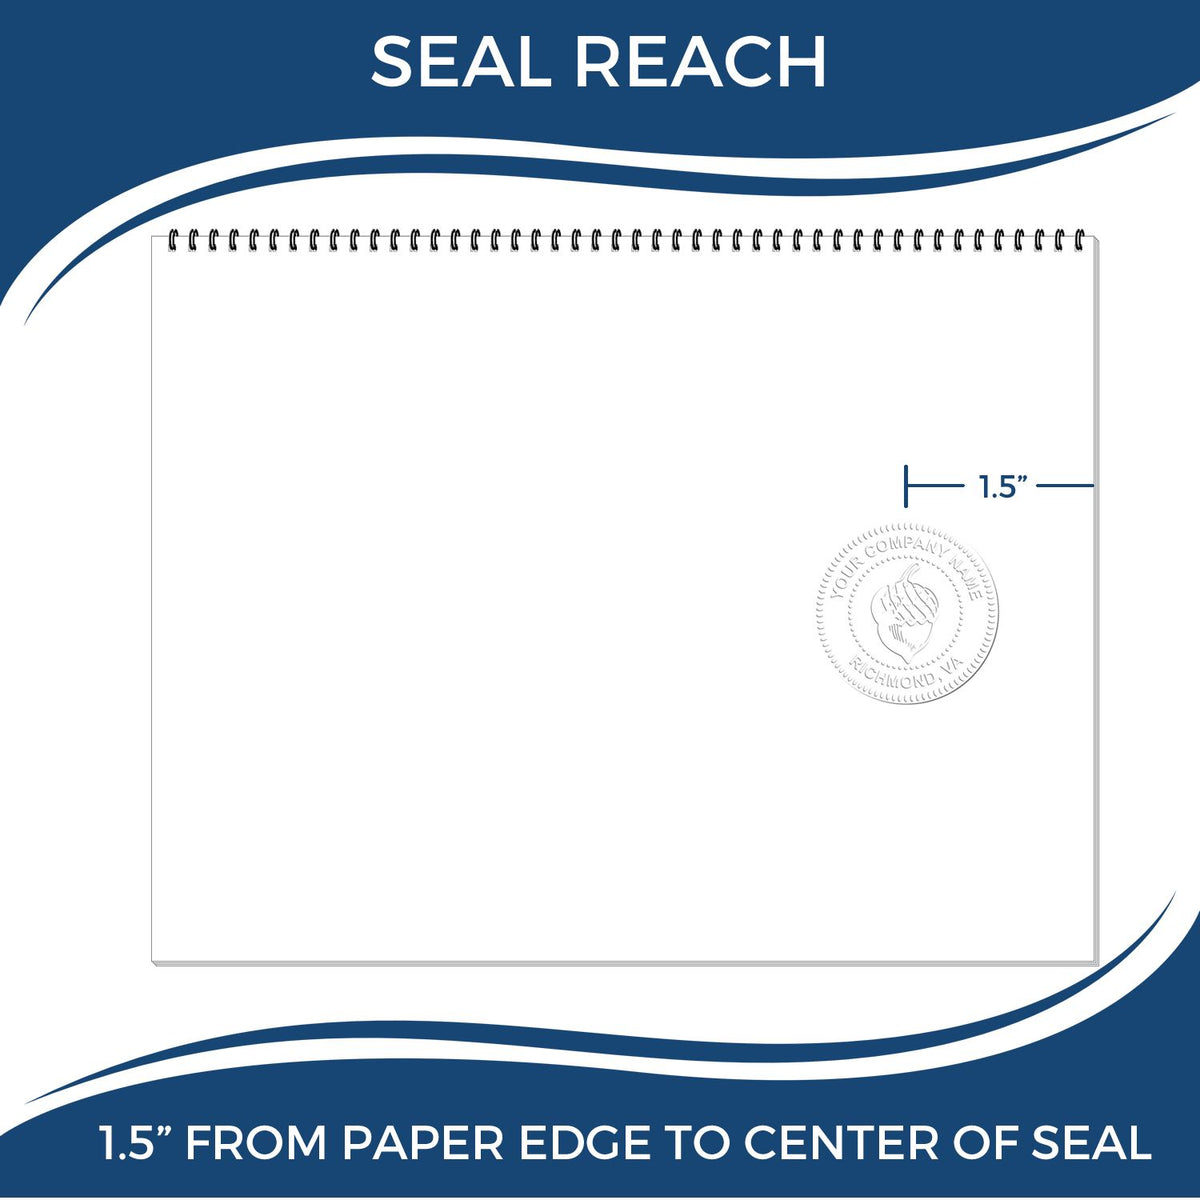 An infographic showing the seal reach which is represented by a ruler and a miniature seal image of the Gift Kentucky Geologist Seal